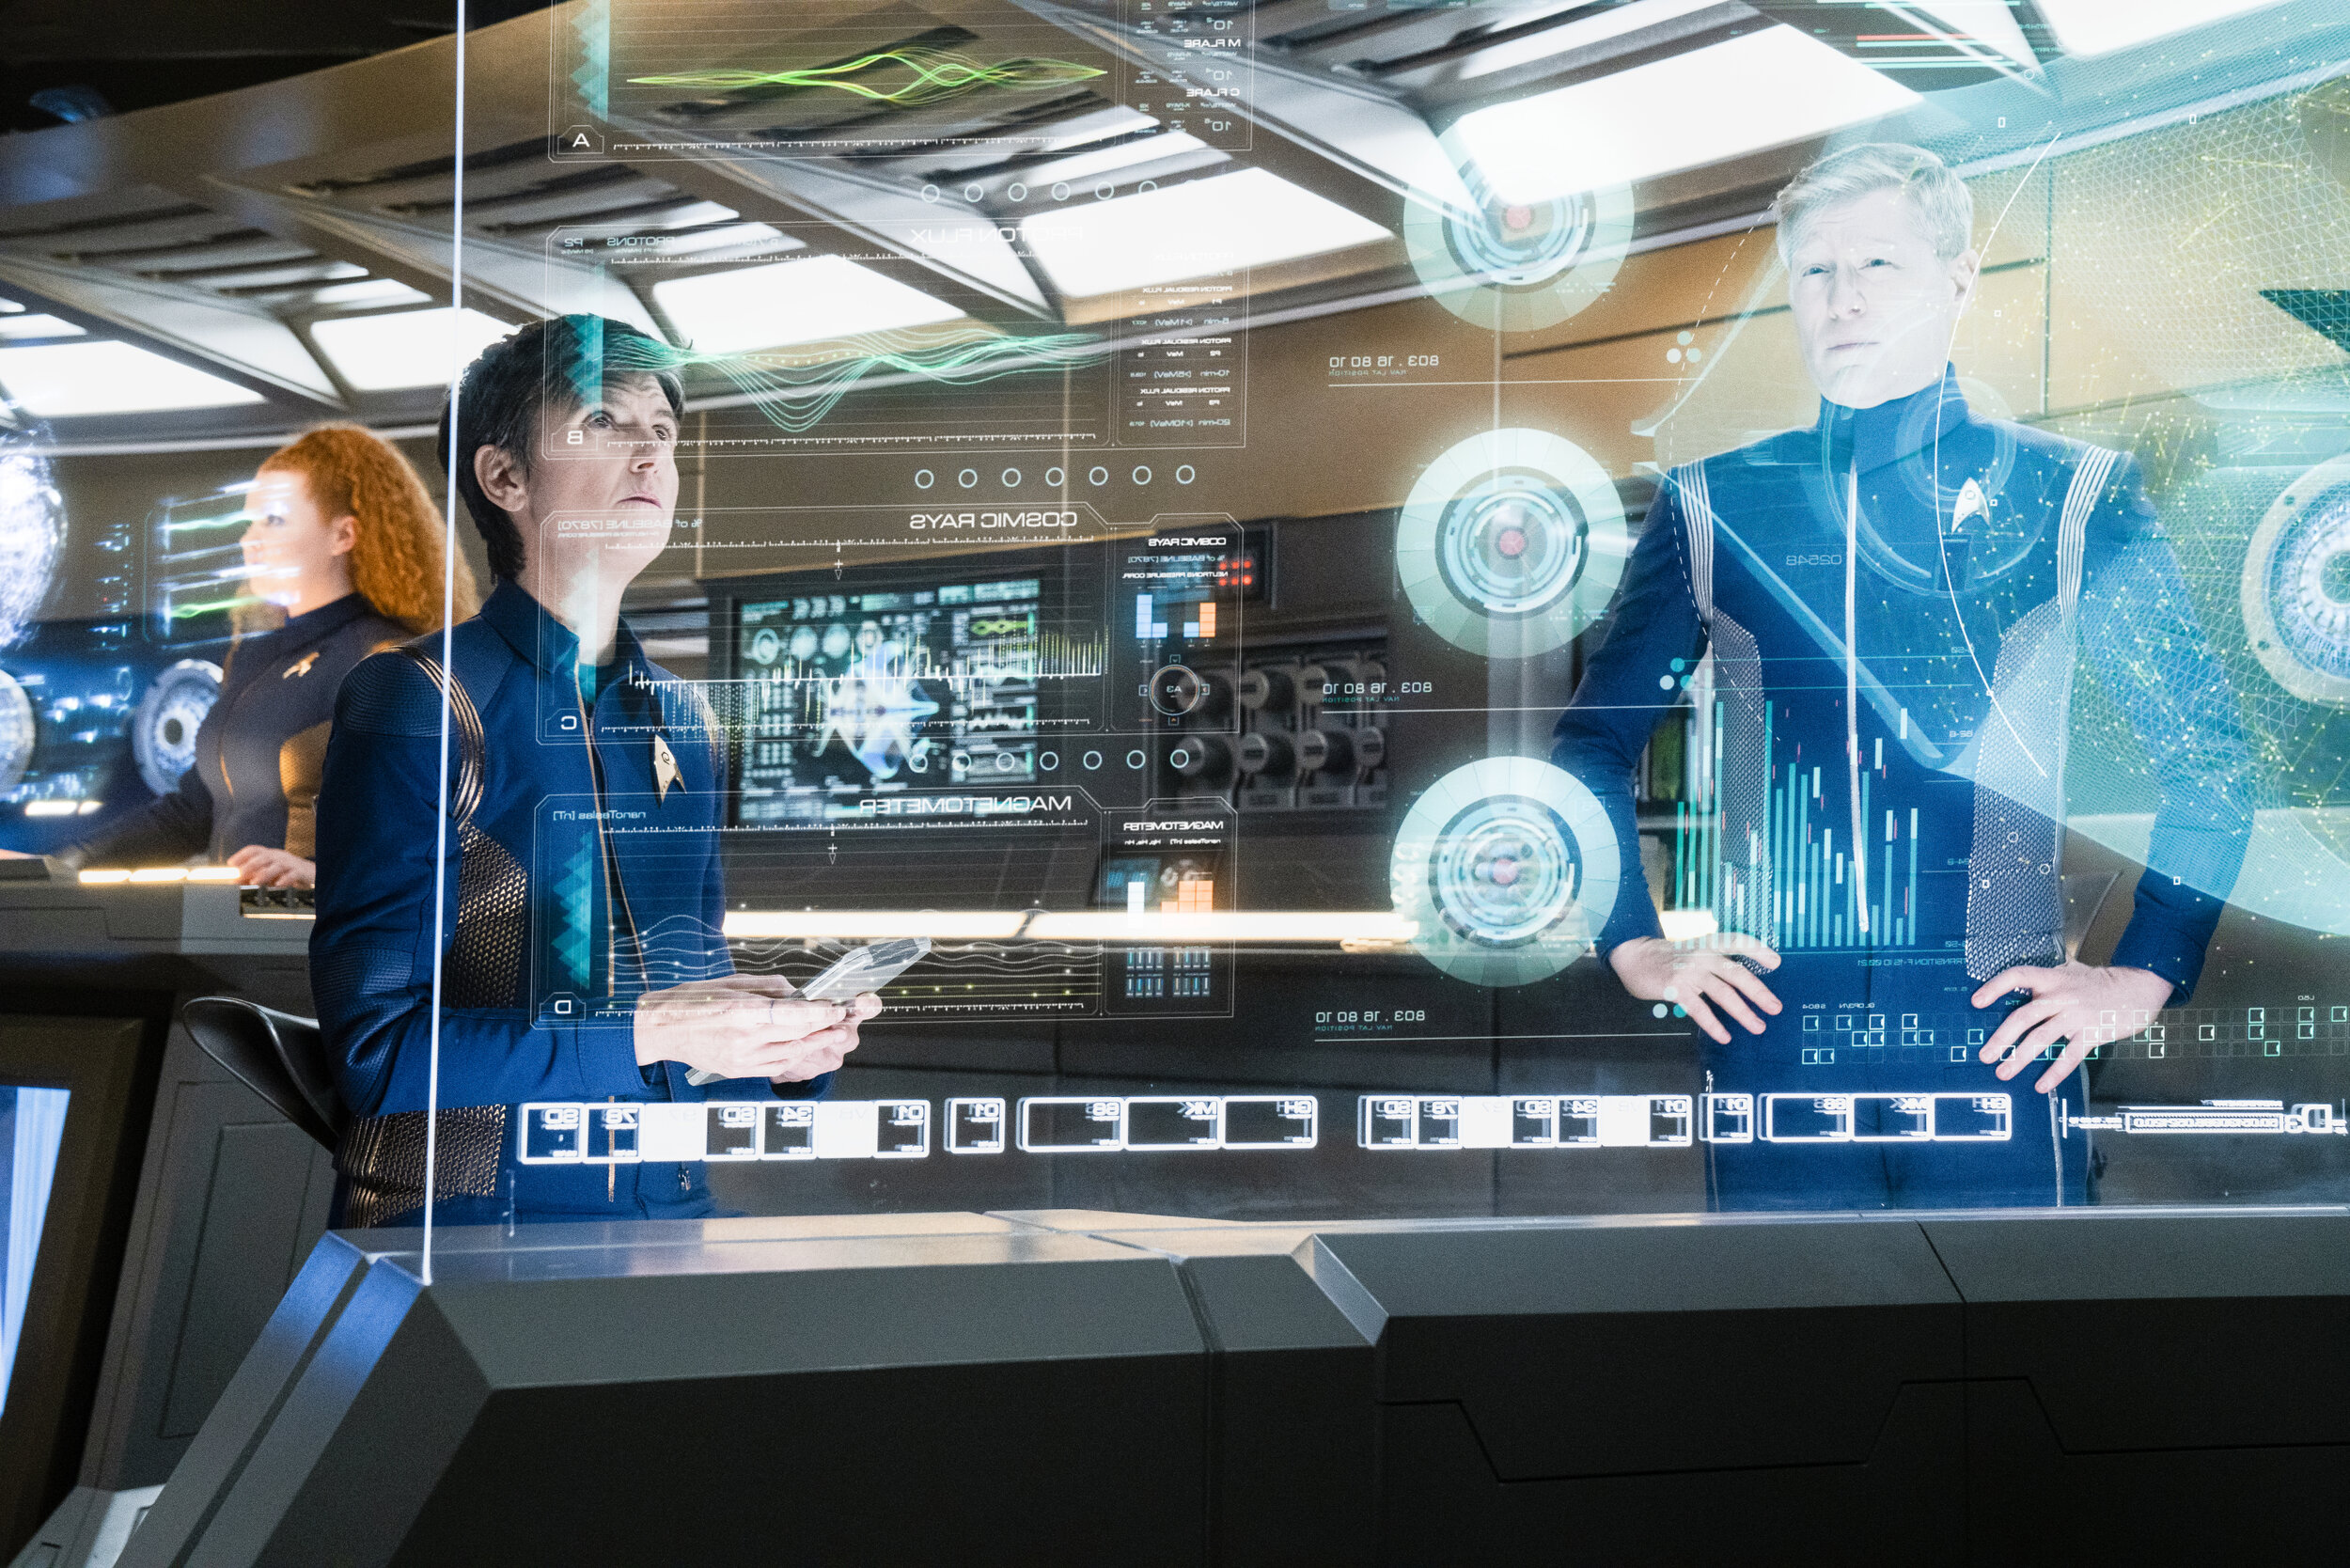   "Die Trying" -- Ep#305 -- Pictured: Tig Notaro as engineer Jett Reno and Anthony Rapp as Lt. Paul Stamets of the CBS All Access series STAR TREK: DISCOVERY. Photo Cr: Michael Gibson/CBS ©2020 CBS Interactive, Inc. All Rights Reserved.  